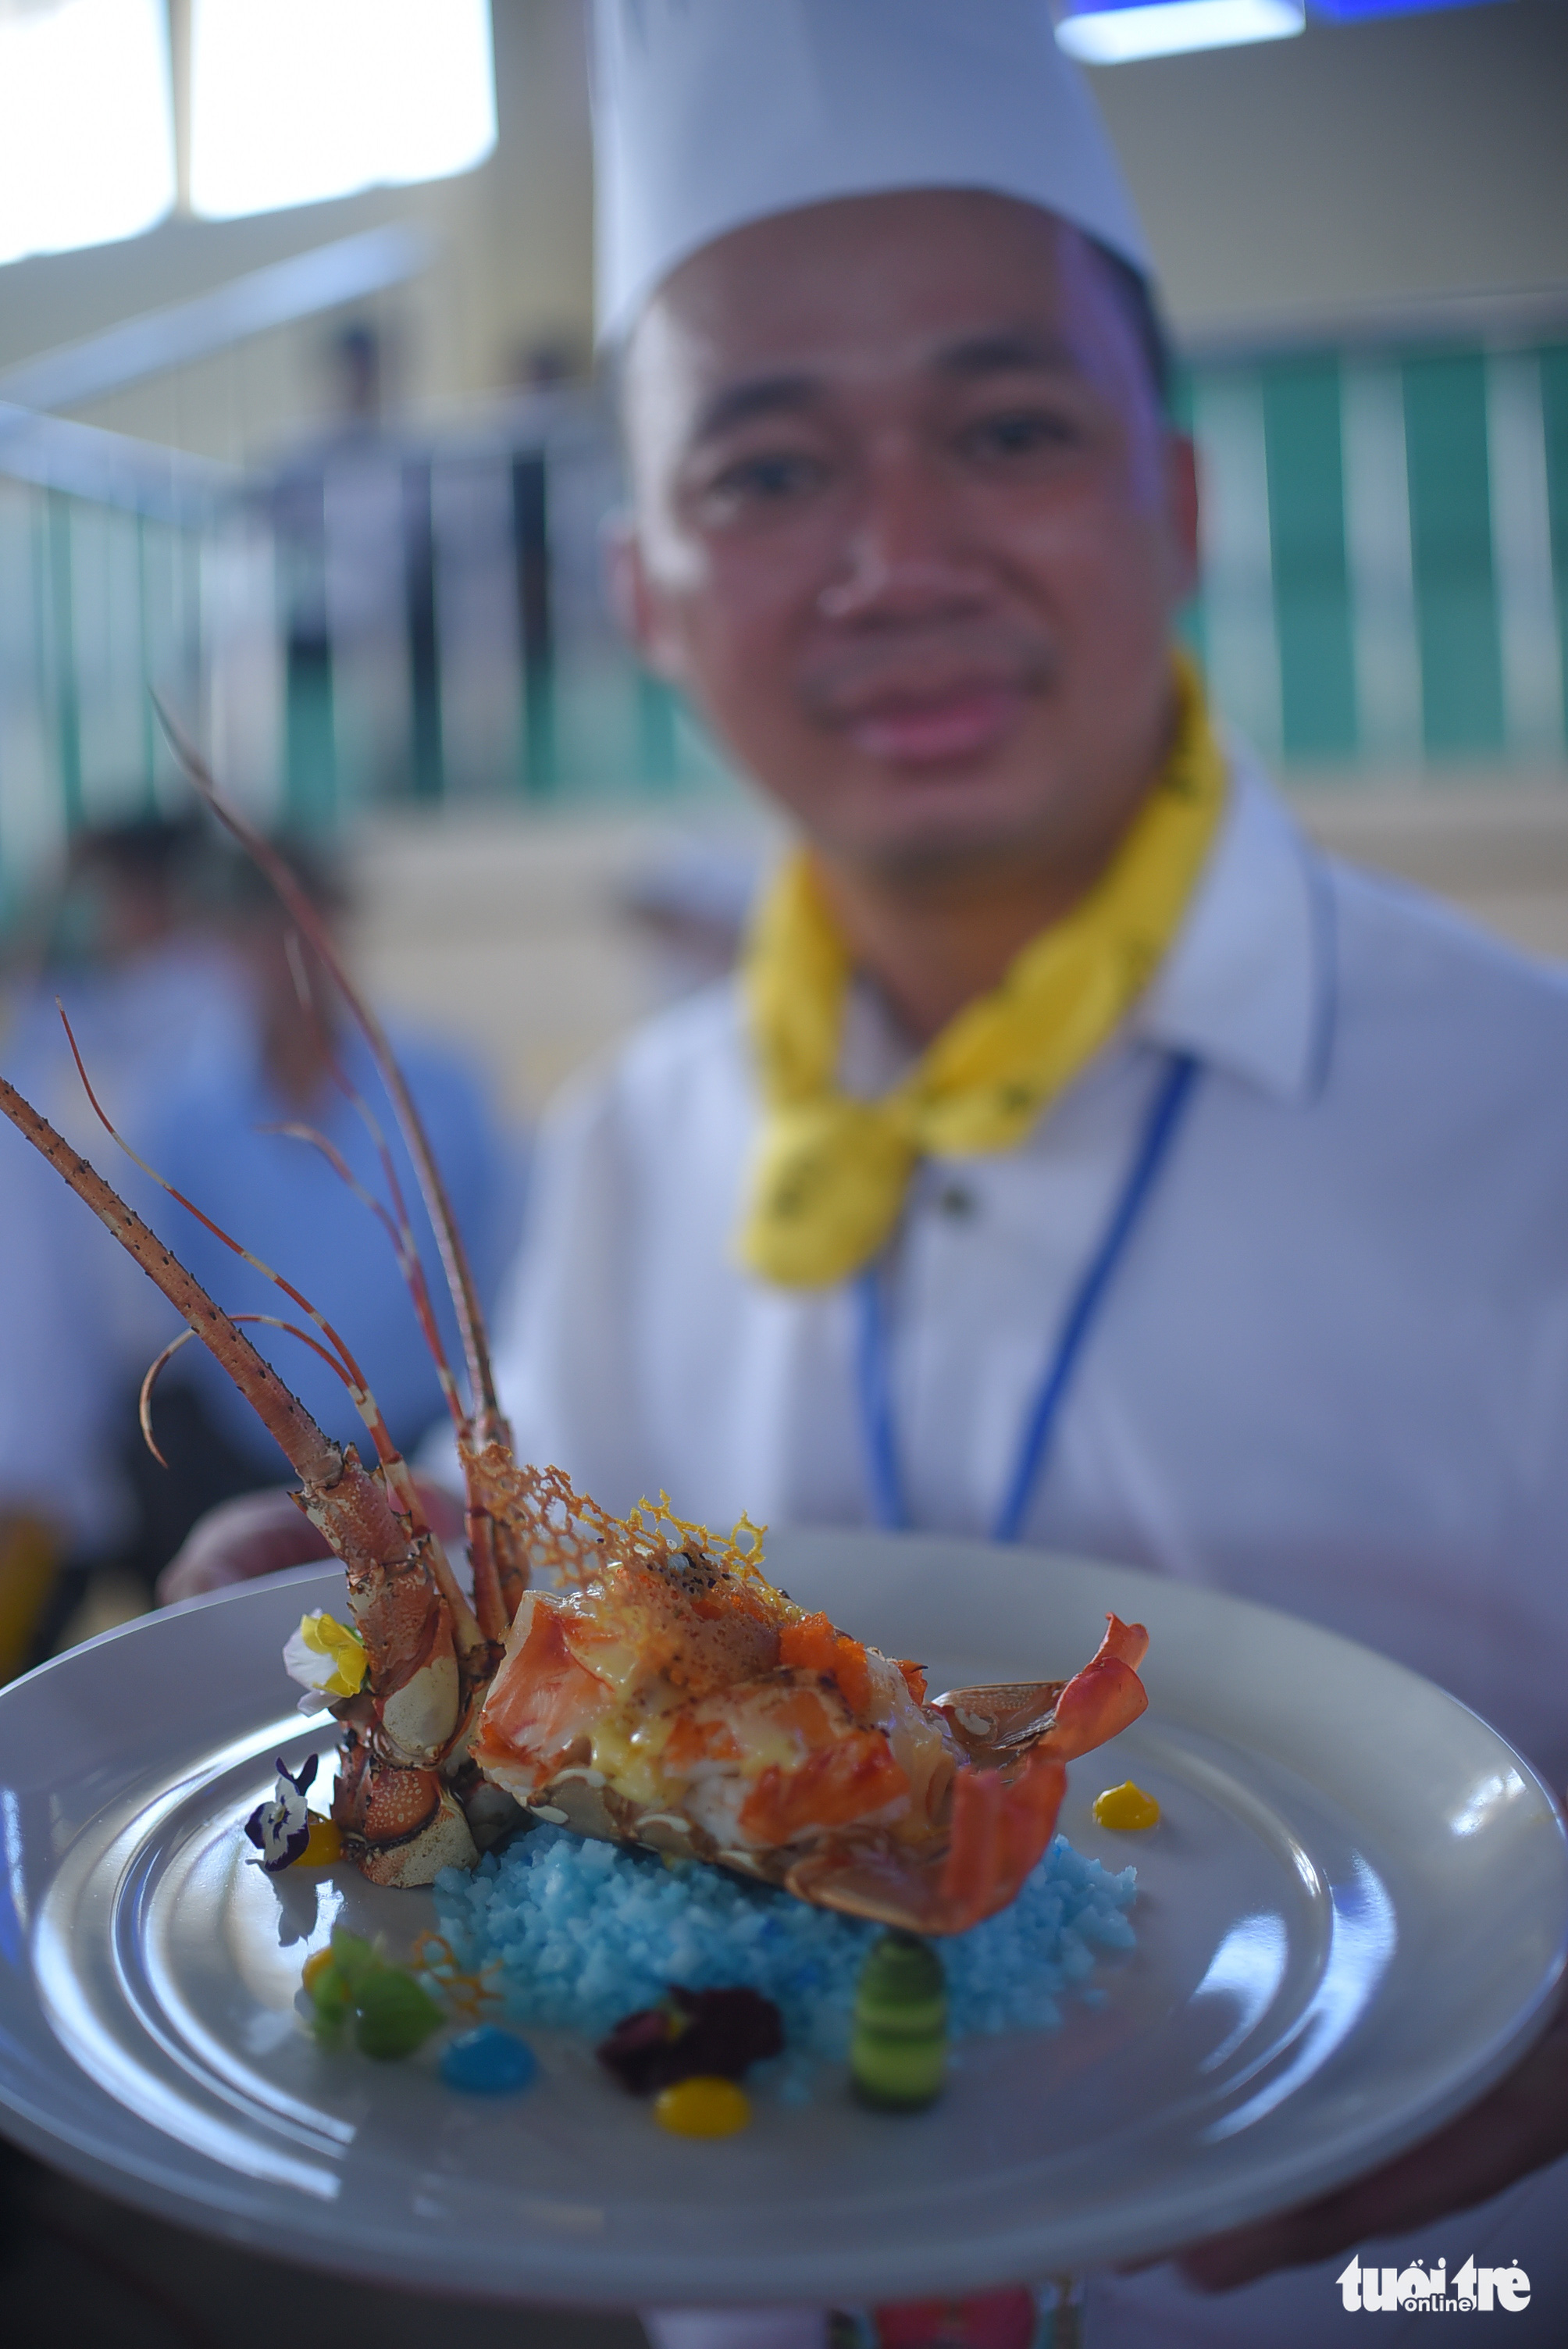 A chef holds a dish of baked lobster at a culinary contest in Phu Yen Province, Vietnam, July 31, 2022. Photo: Lam Thien / Tuoi Tre